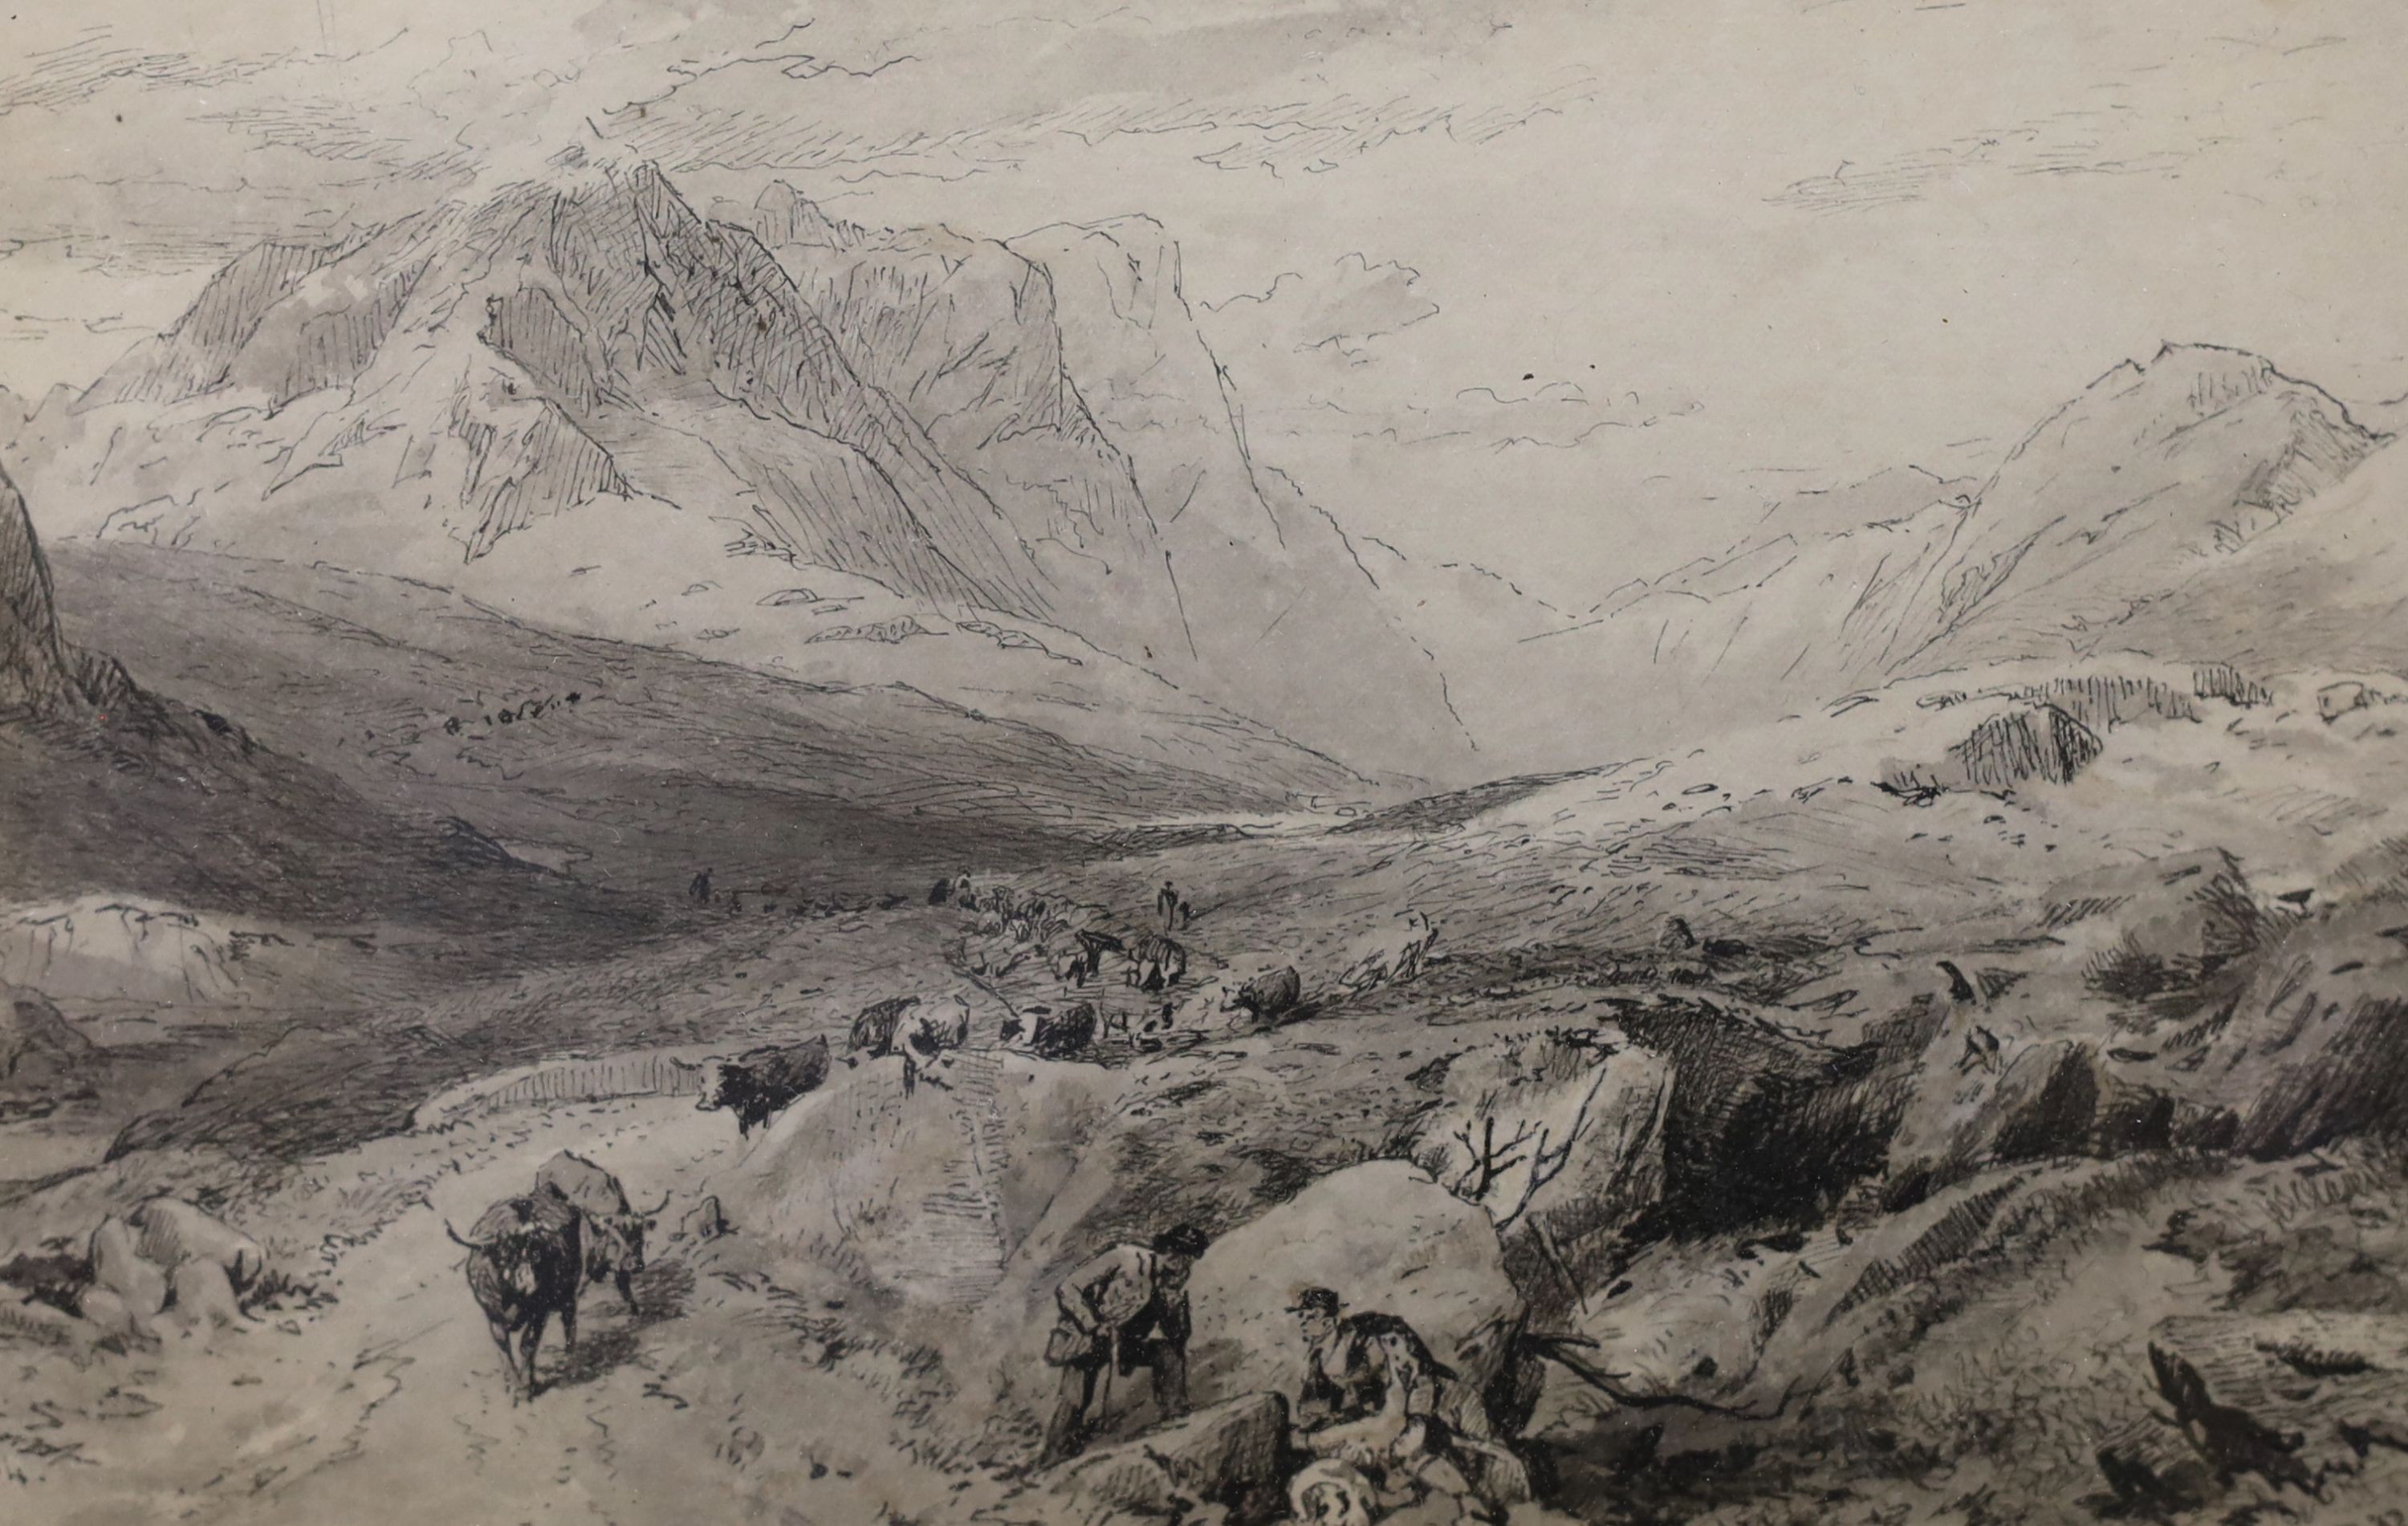 Thomas Miles Richardson (1813-1890), pair of ink and wash drawings, 'Etna from Taormina' and 'Glencoe from Ranoch Moor', initialled and dated 1884/85, 14 x 21cm